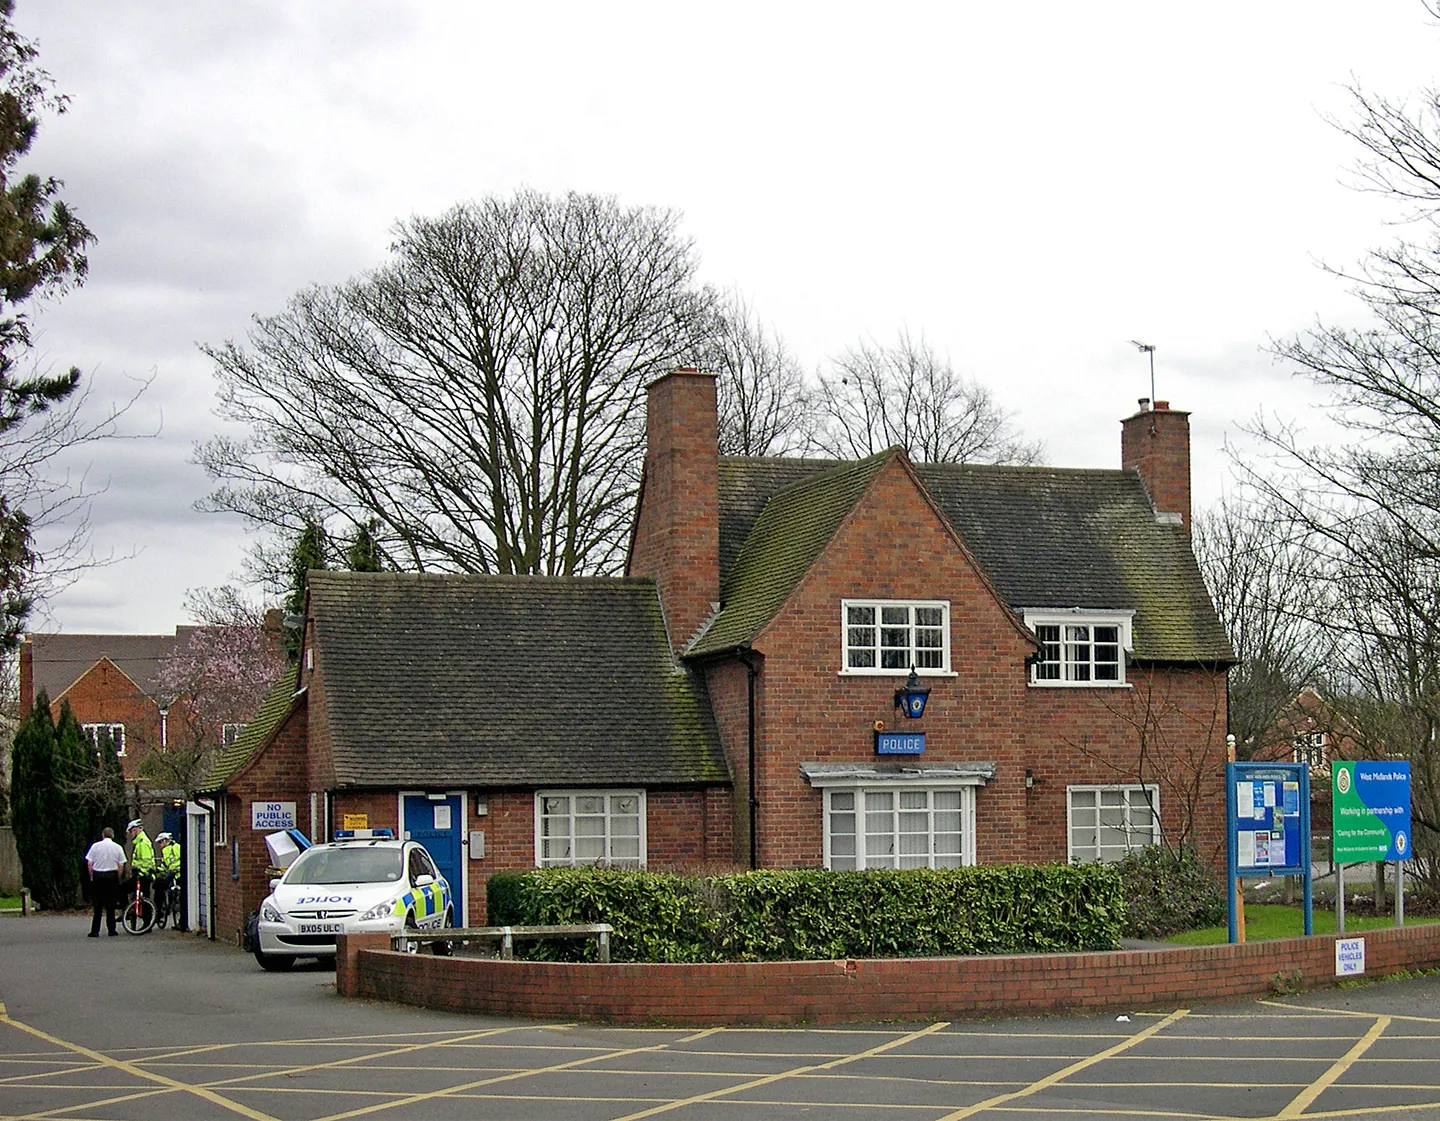 Photo showing: Village Police Station, Kingswinford, Staffordshire A dying breed; many other similar small police stations have been closed. This one covers Kingswinford, Wall Heath, Wordsley, and Hawbush.....but for how long? The West Midlands Police website states: "the team consists of eight full time PCs, two part time PCs, eight police community support officers (PCSOs) and a number of special constables."